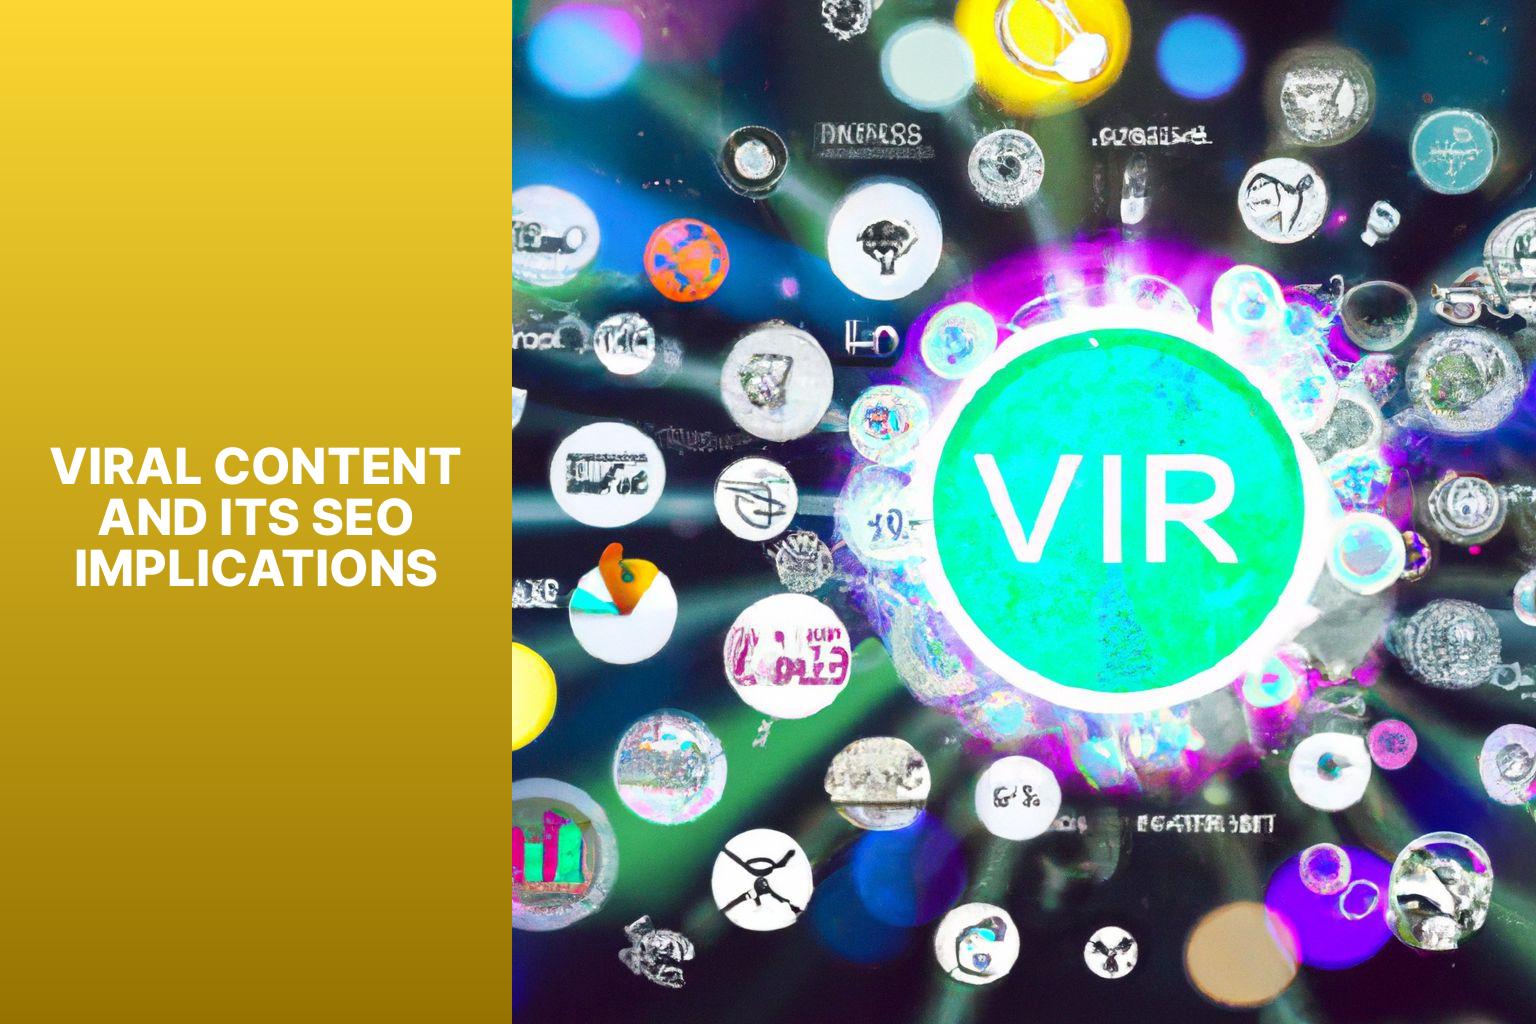 Viral Content and Its SEO Implications